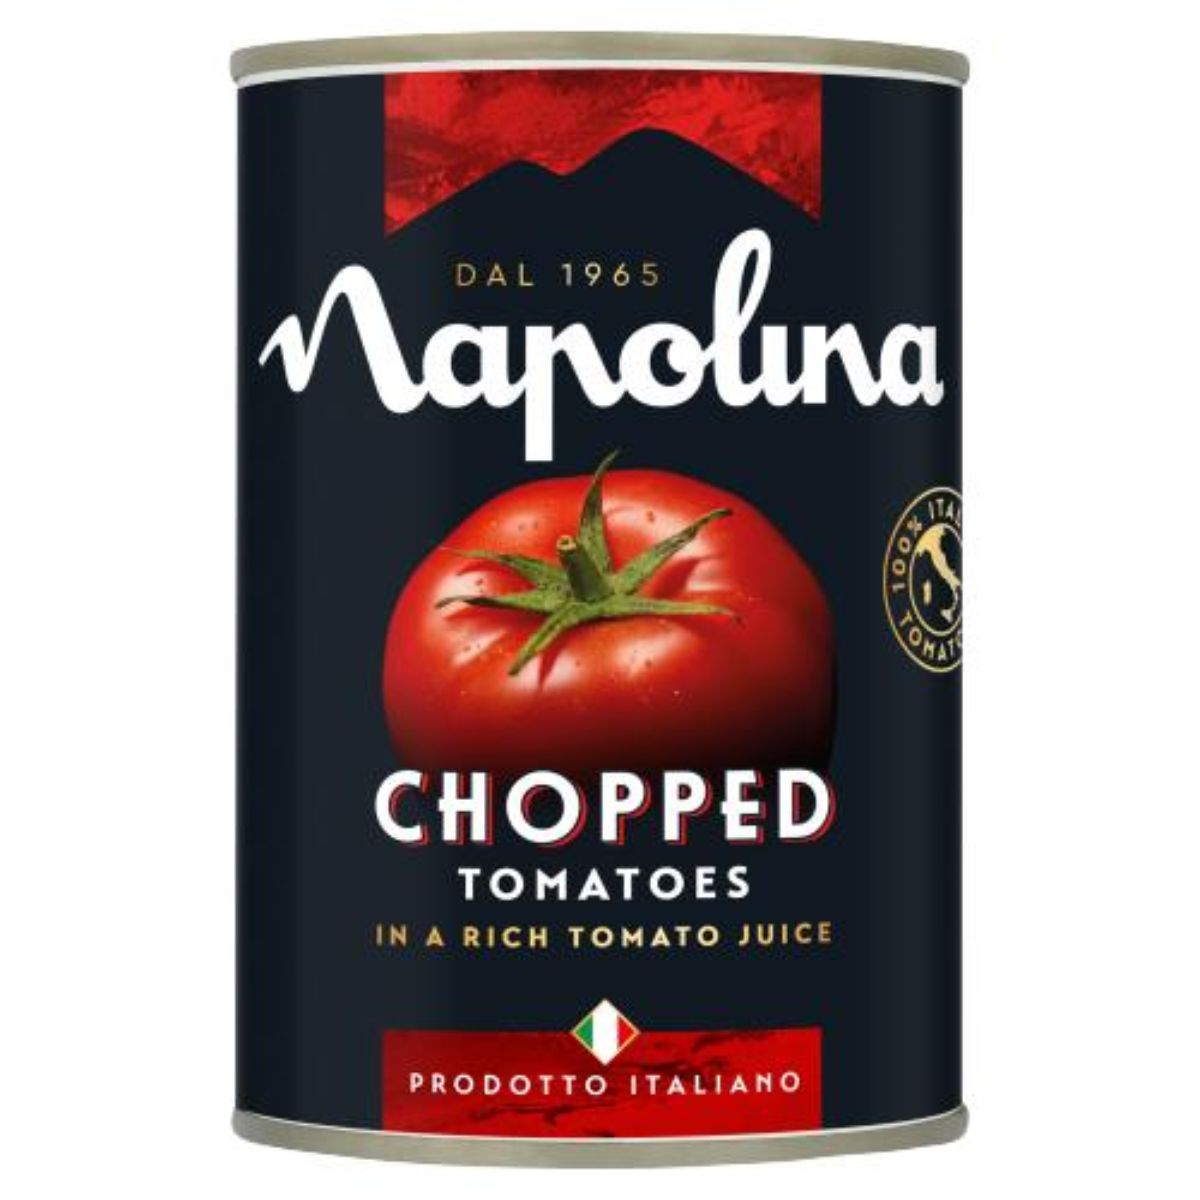 Napolina - Chopped Tomatoes - 400g in a can.